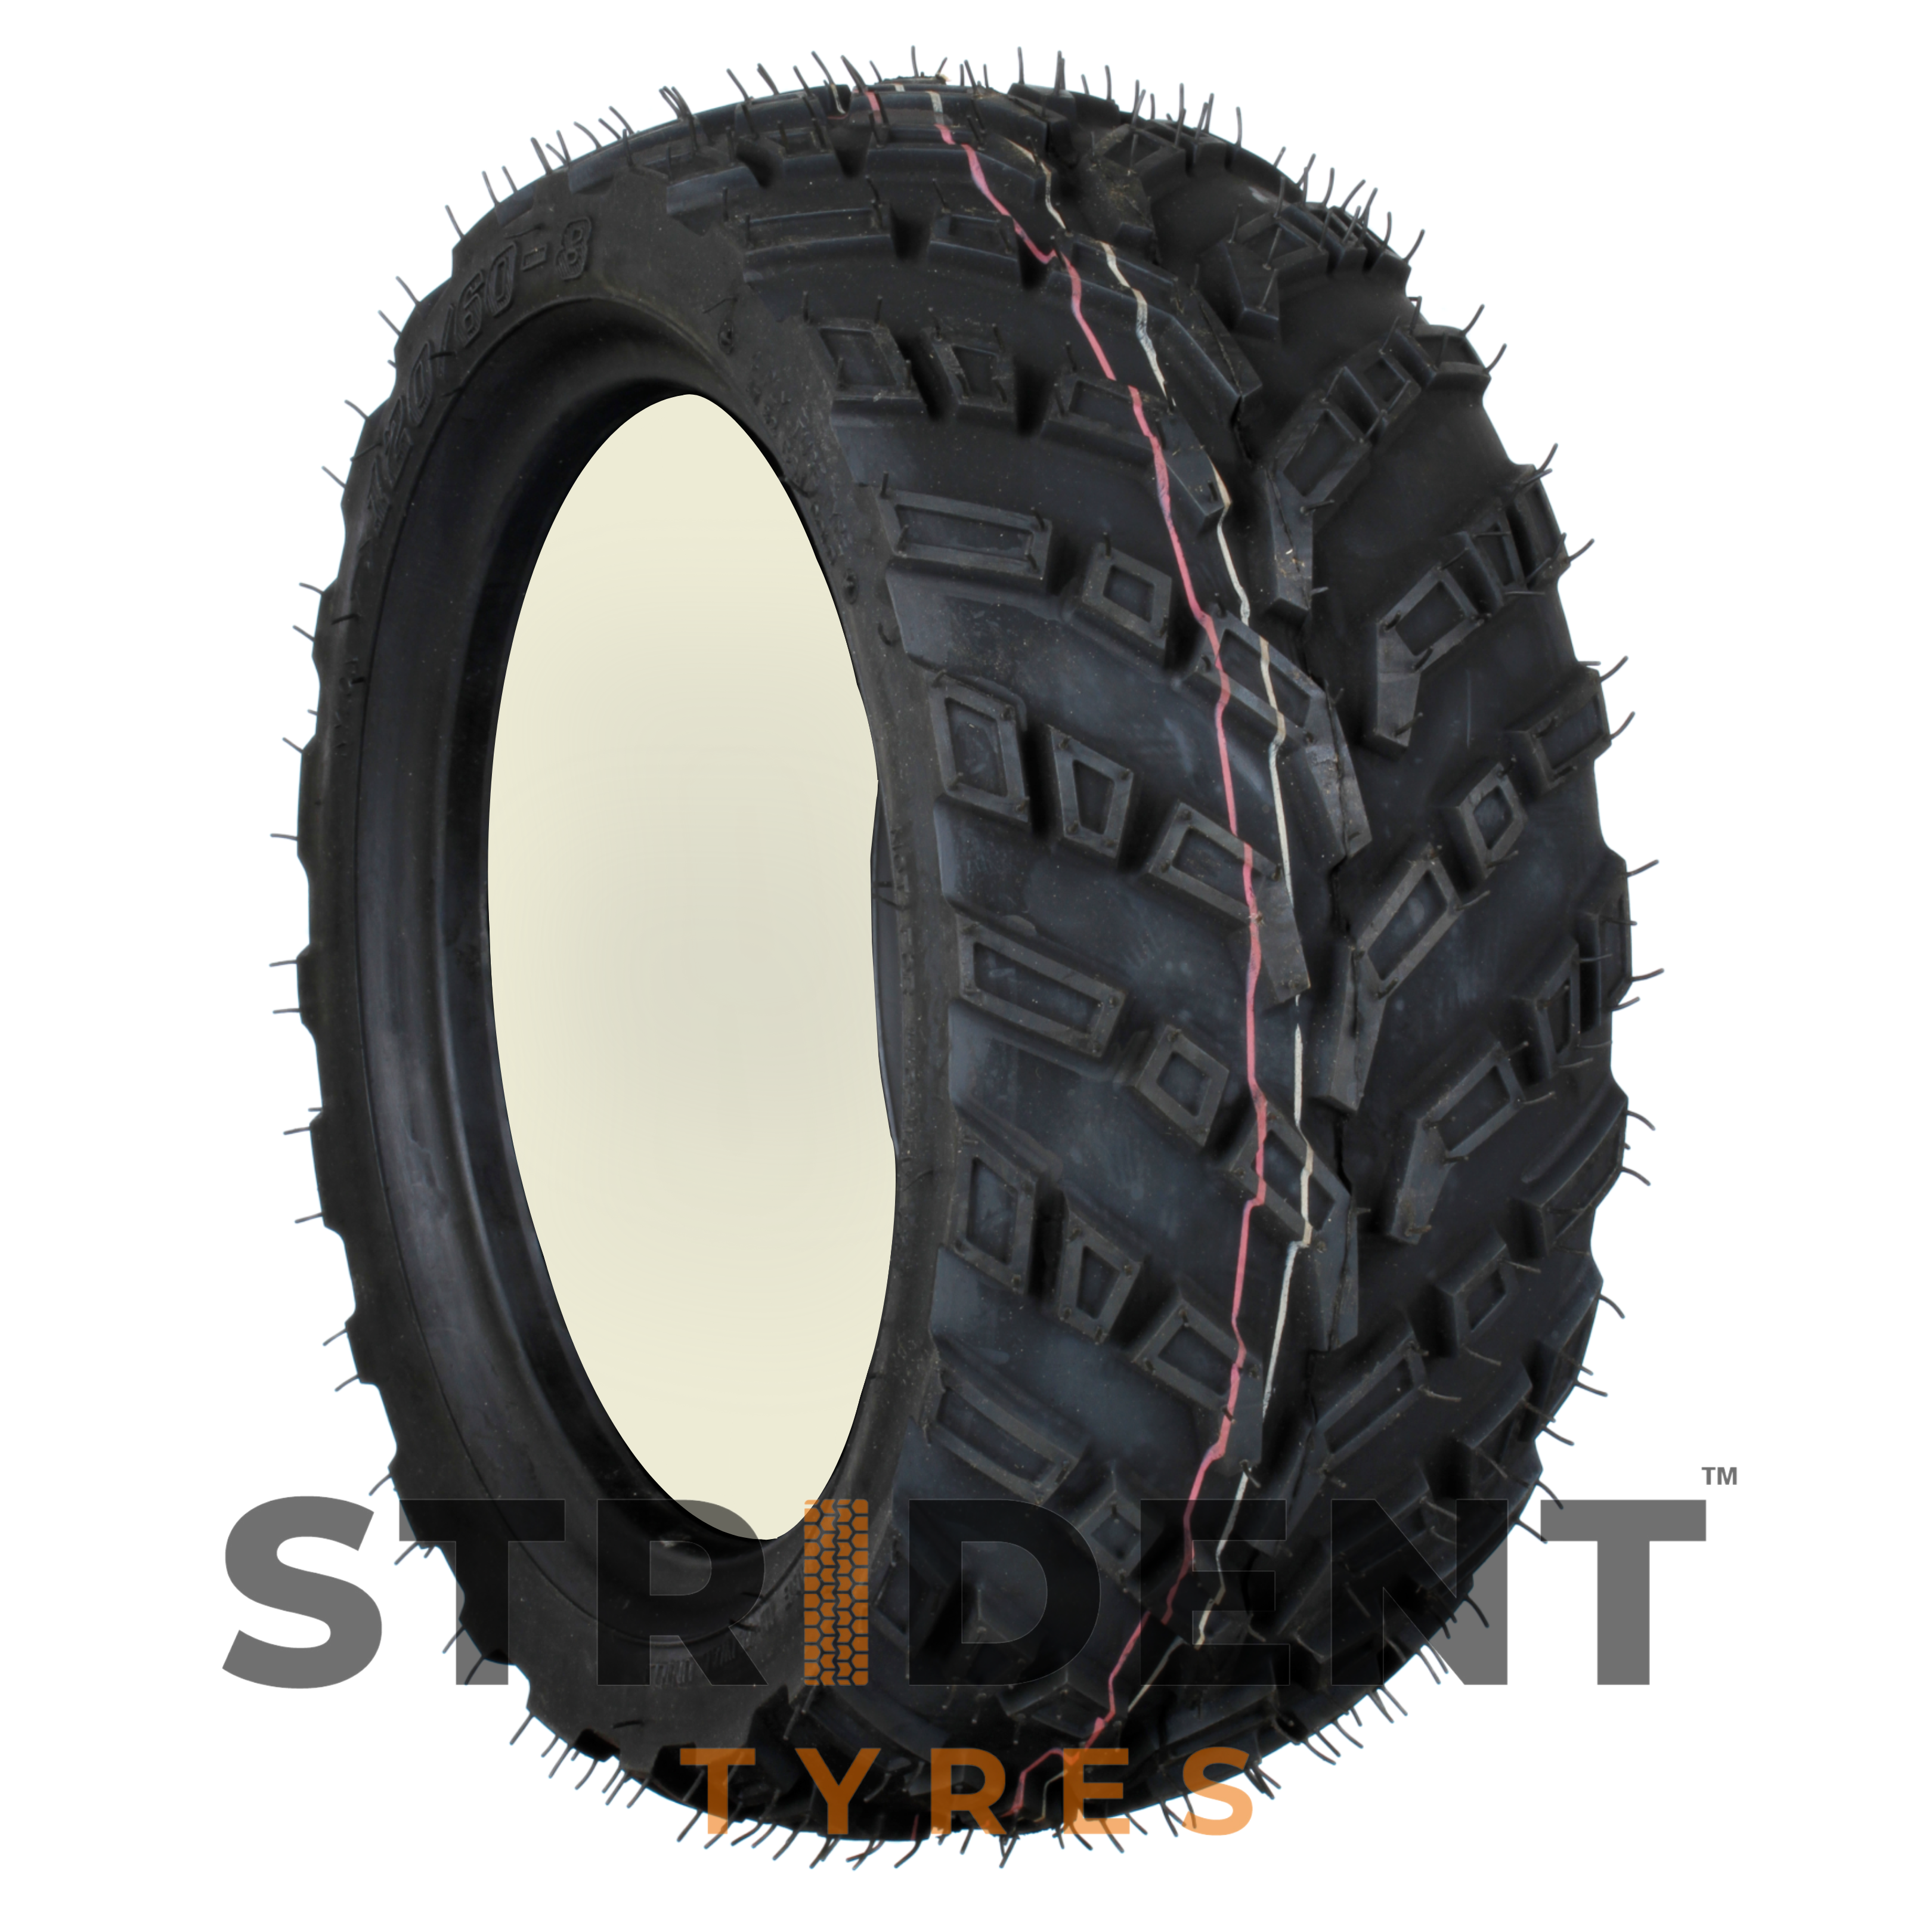 Solid Black Tyre 120/60 X 8